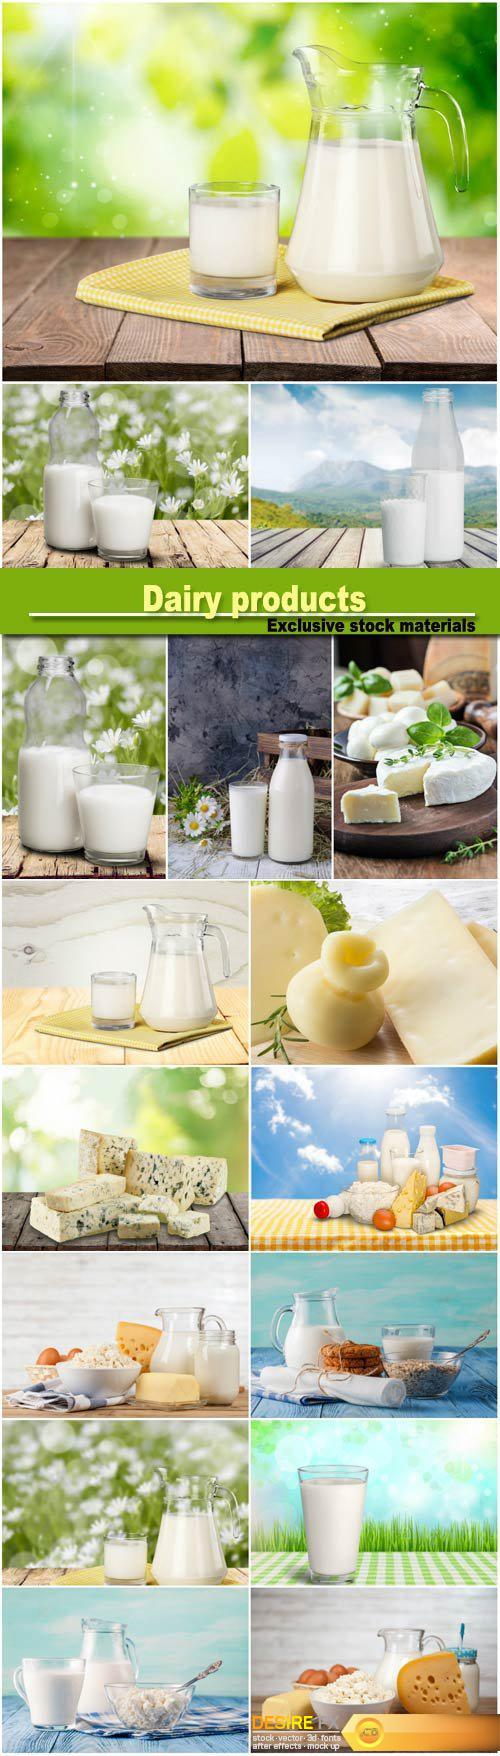 Dairy products, cheese and milk